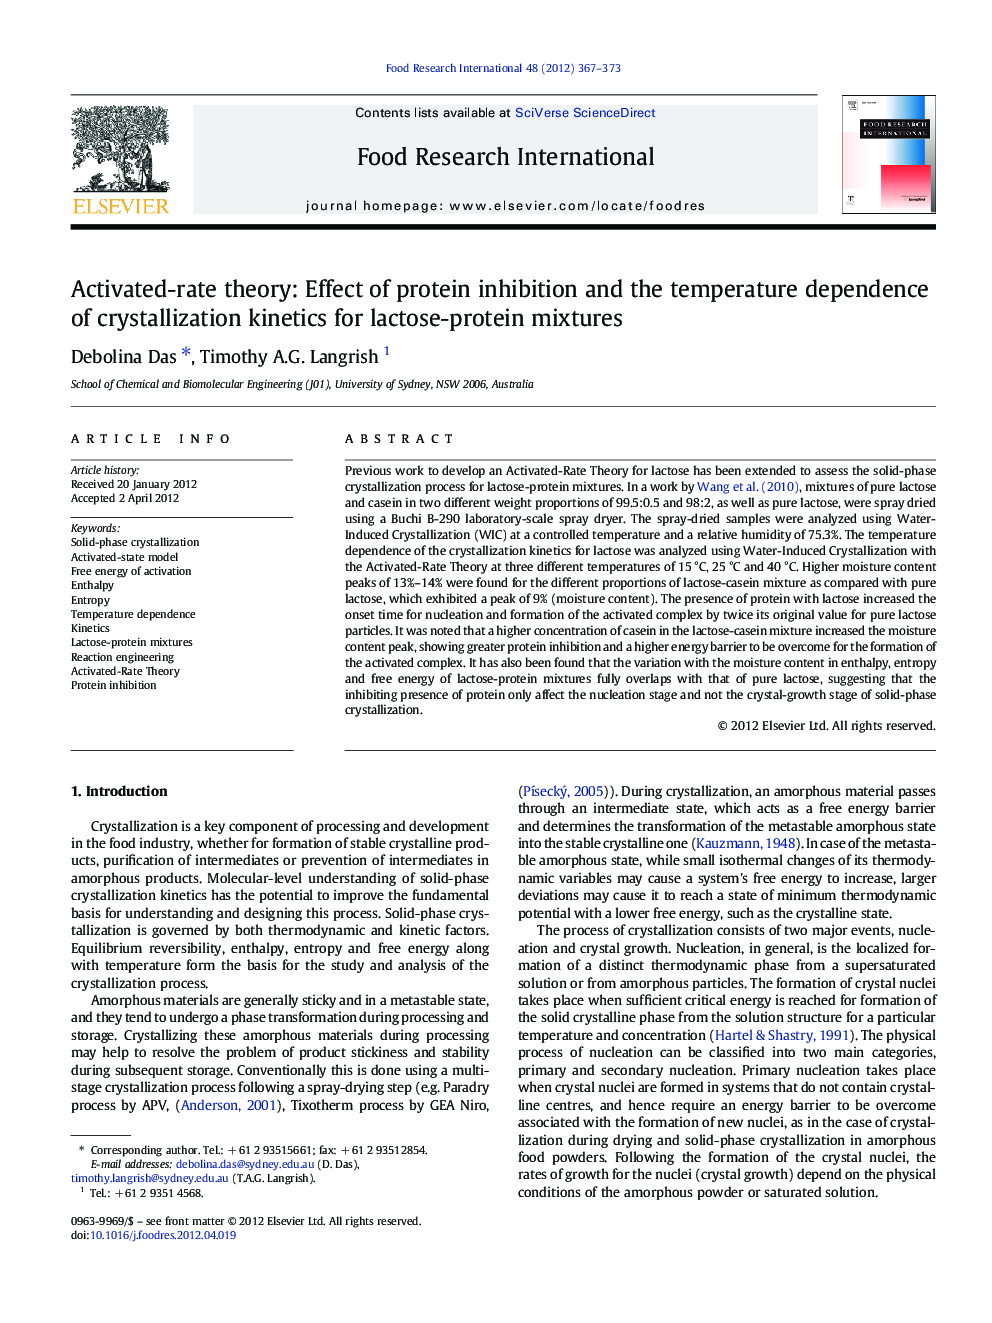 Activated-rate theory: Effect of protein inhibition and the temperature dependence of crystallization kinetics for lactose-protein mixtures